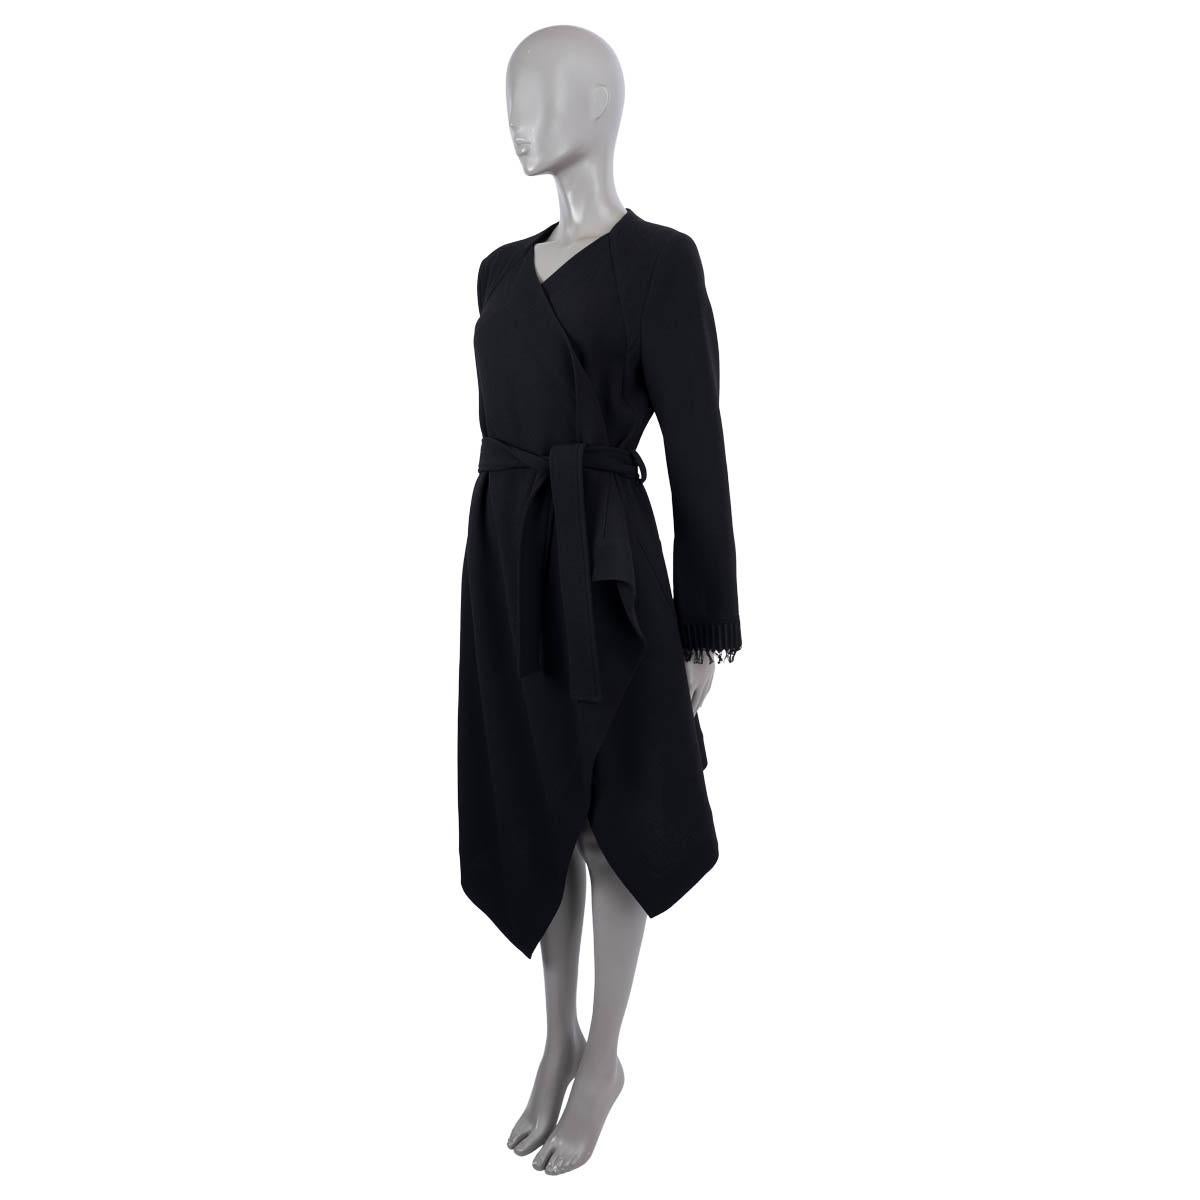 100% authentic Roland Mouret 2017 Studham draped and asymmetric open coat in black wool (100%) with silk lining (100%). The design features a slit and fringed details on the cuff, slit pockets on the side and has a belt to cinch the waist. Has been